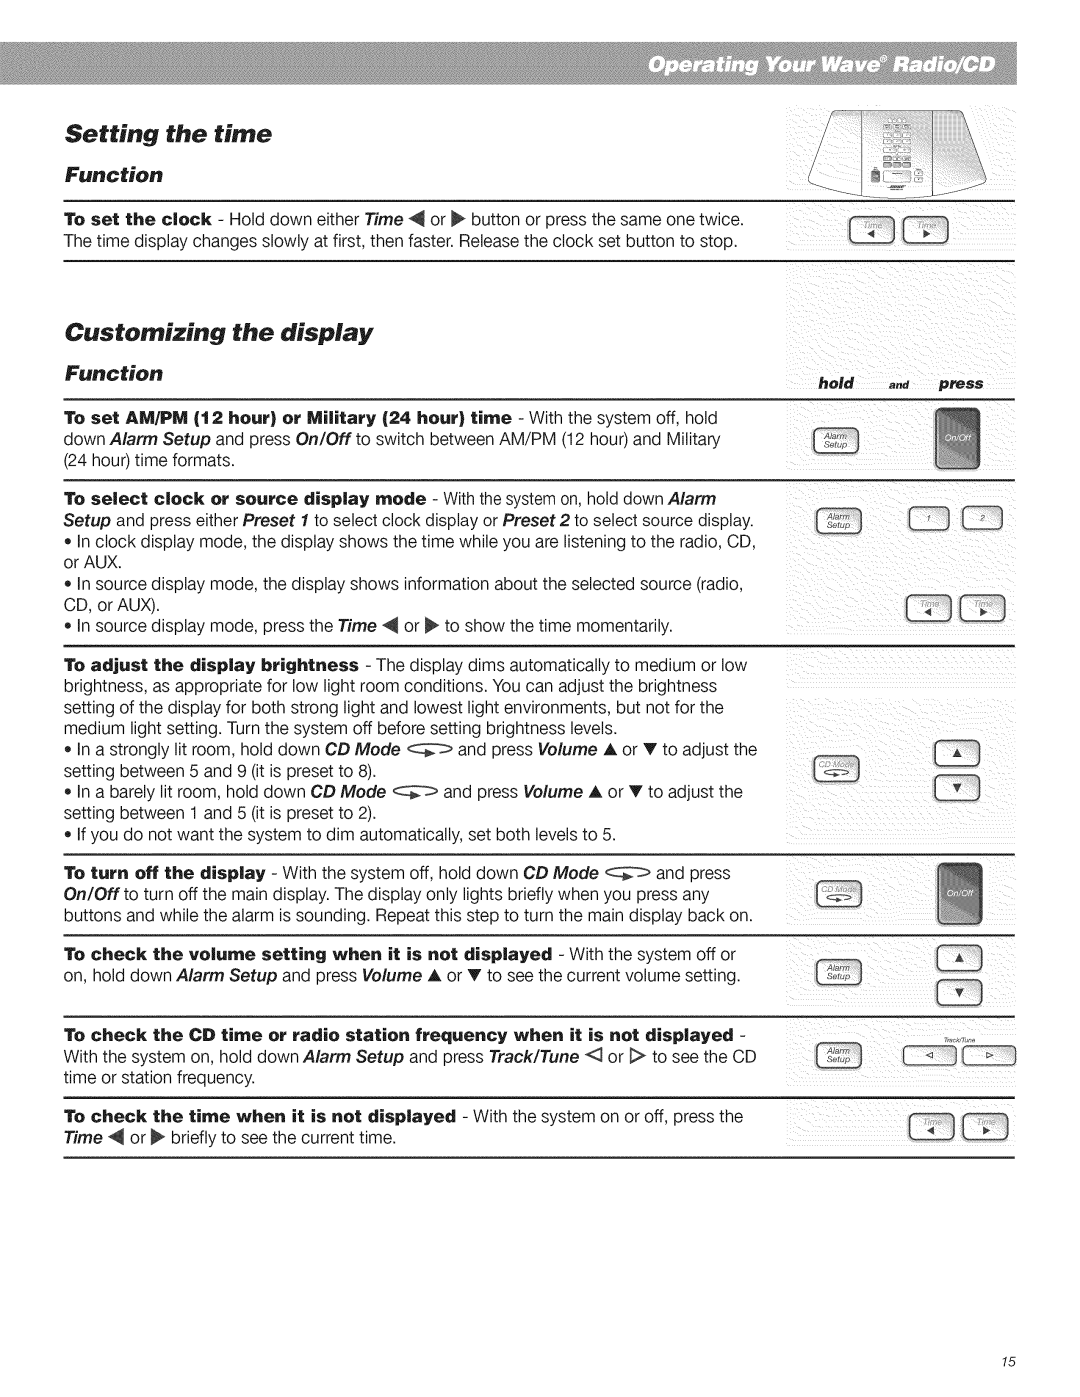 Bose CD Player manual Setting the time, Customizing the display 